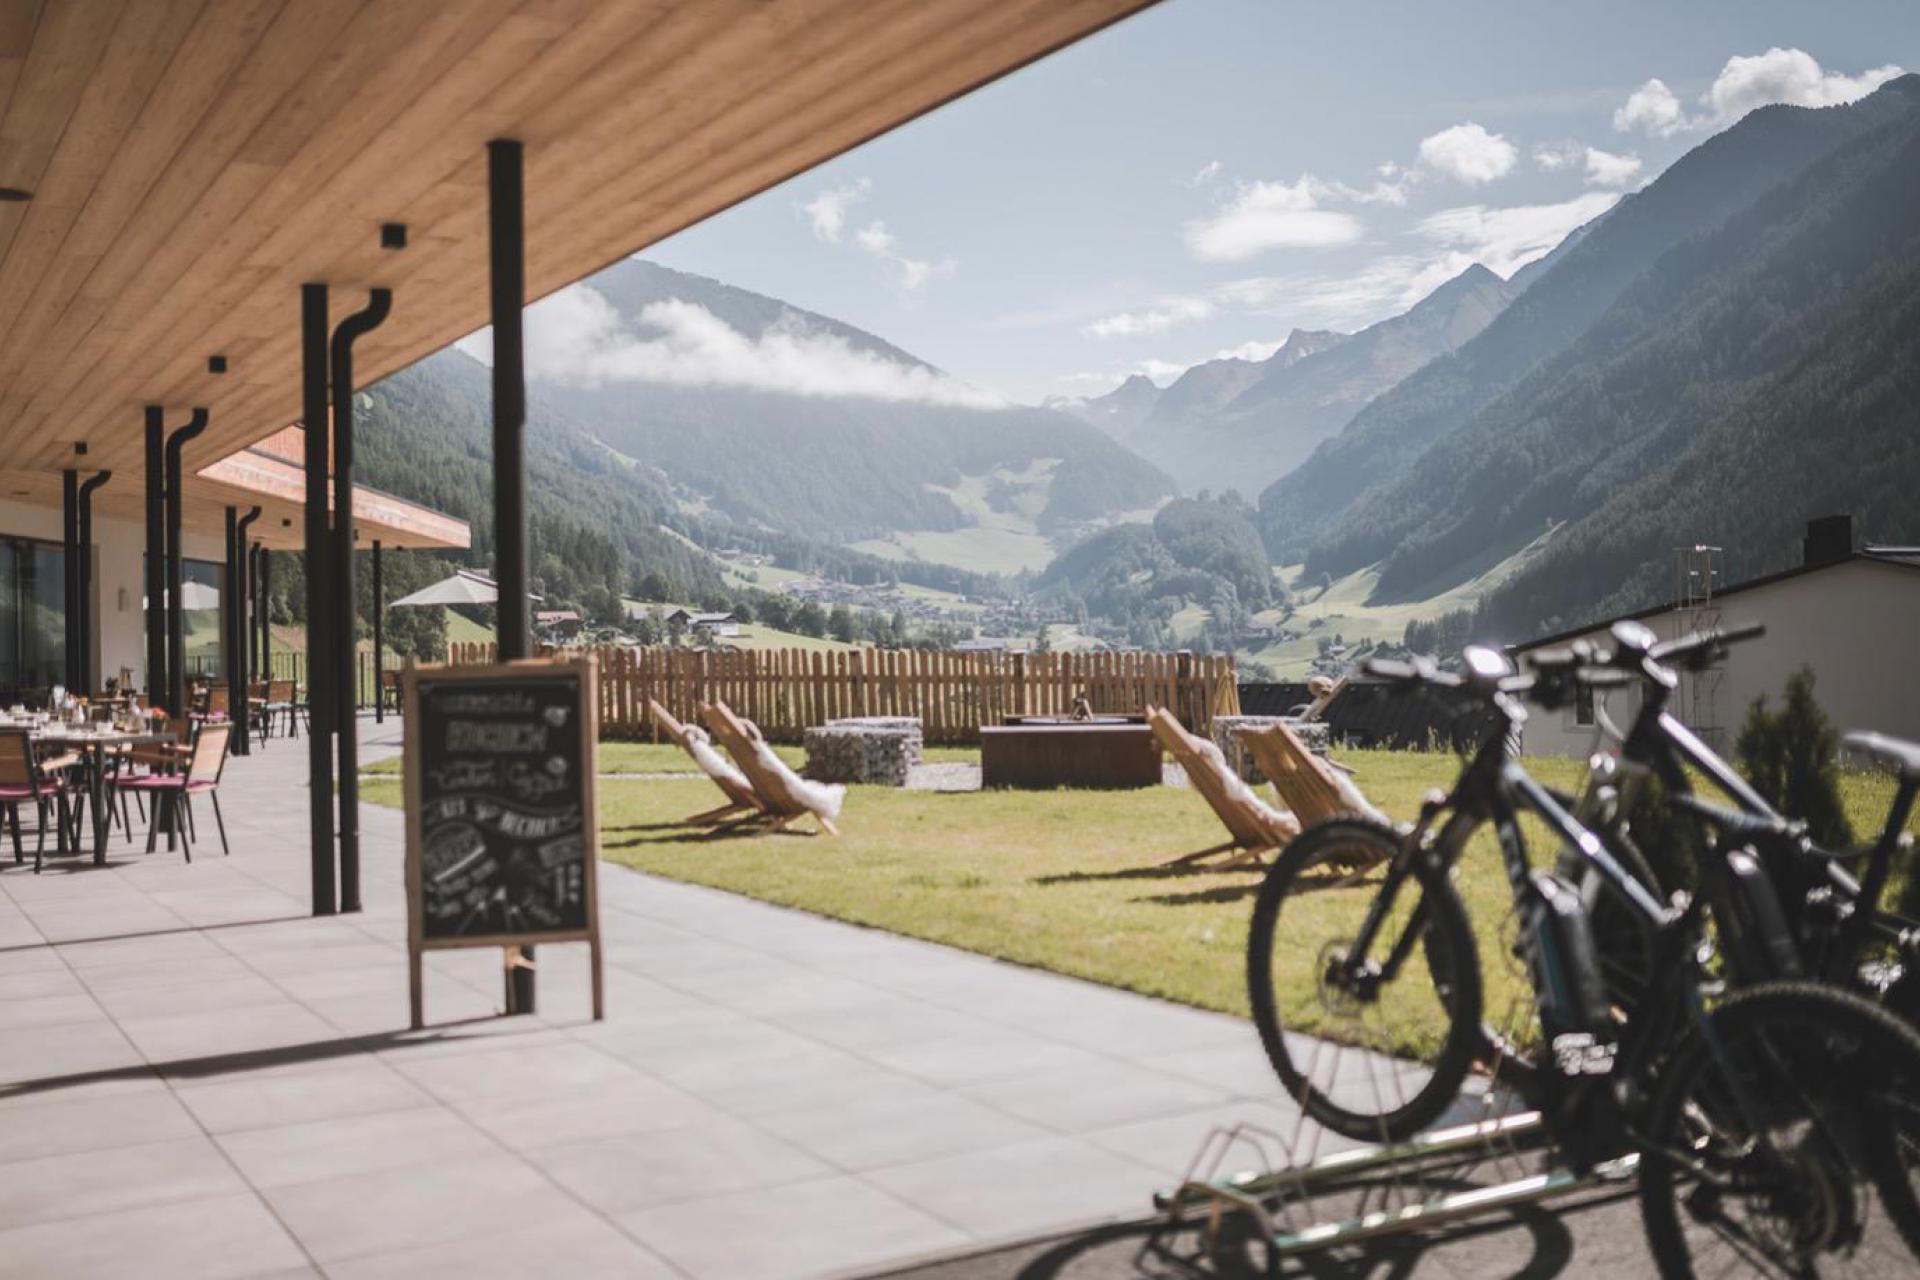 1. Luxury agriturismo with its own electric mountain bikes